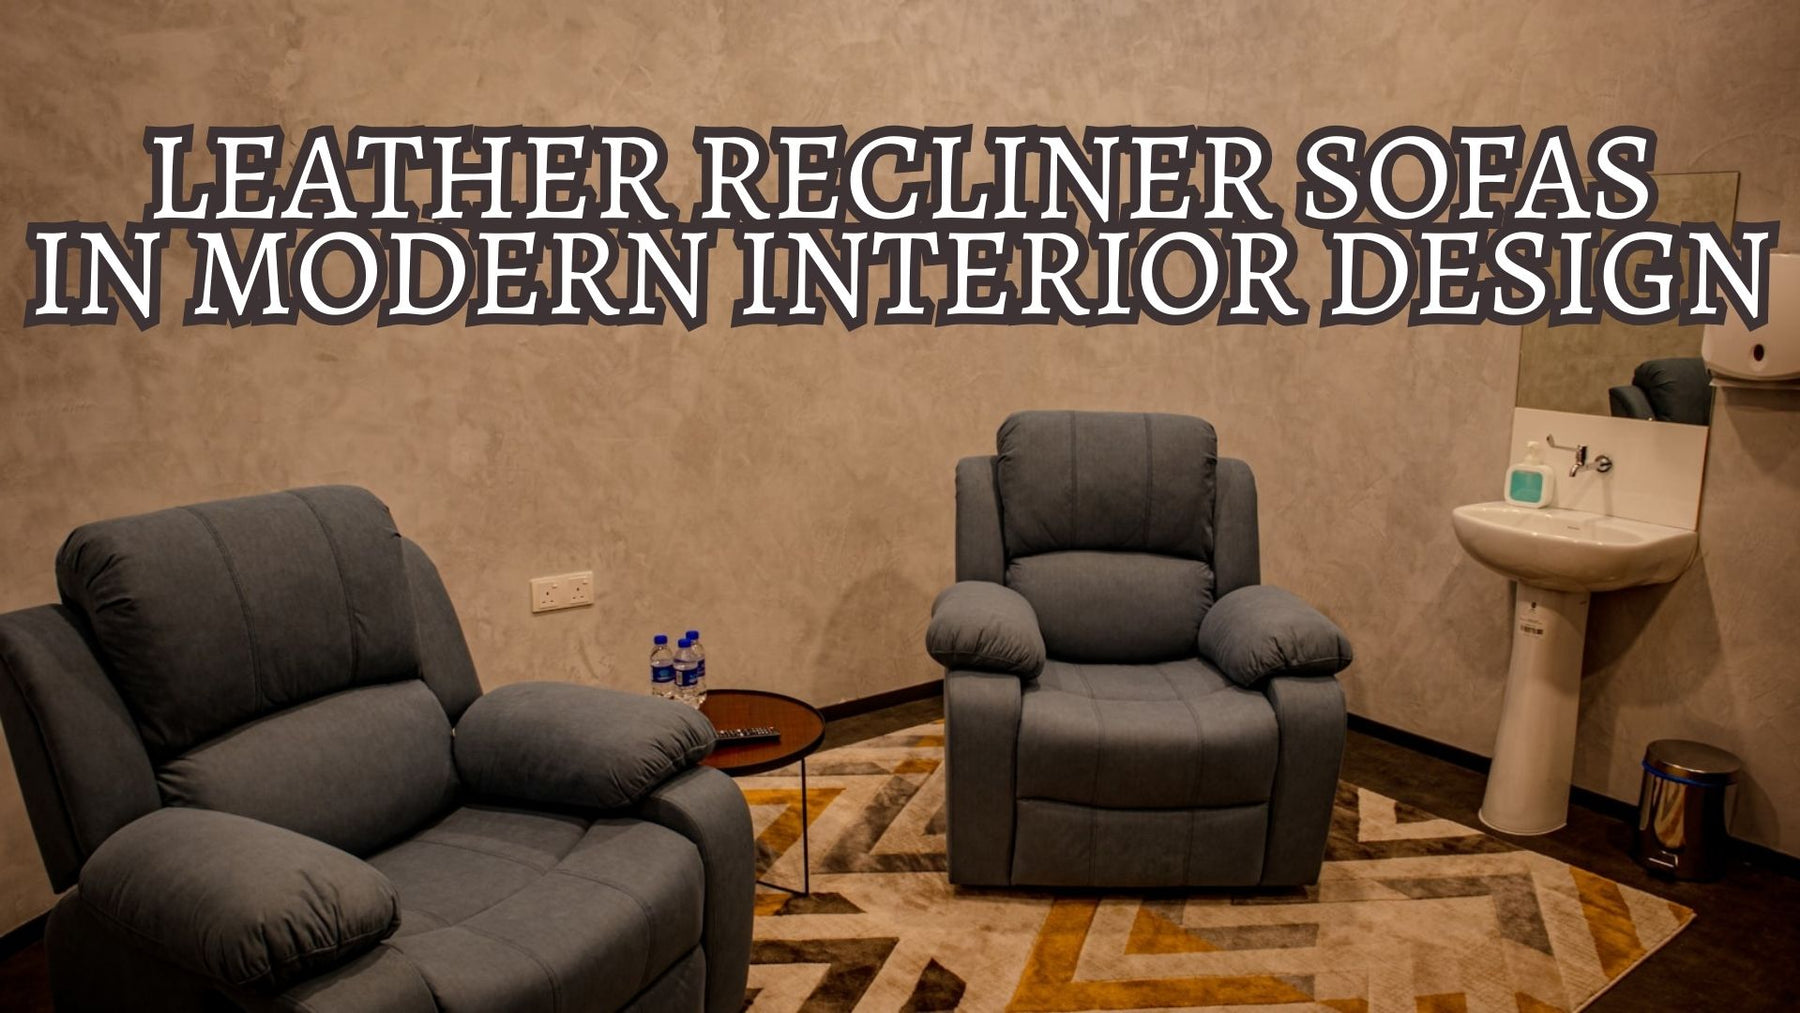 The Role of Leather Recliner Sofas in Modern Interior Design